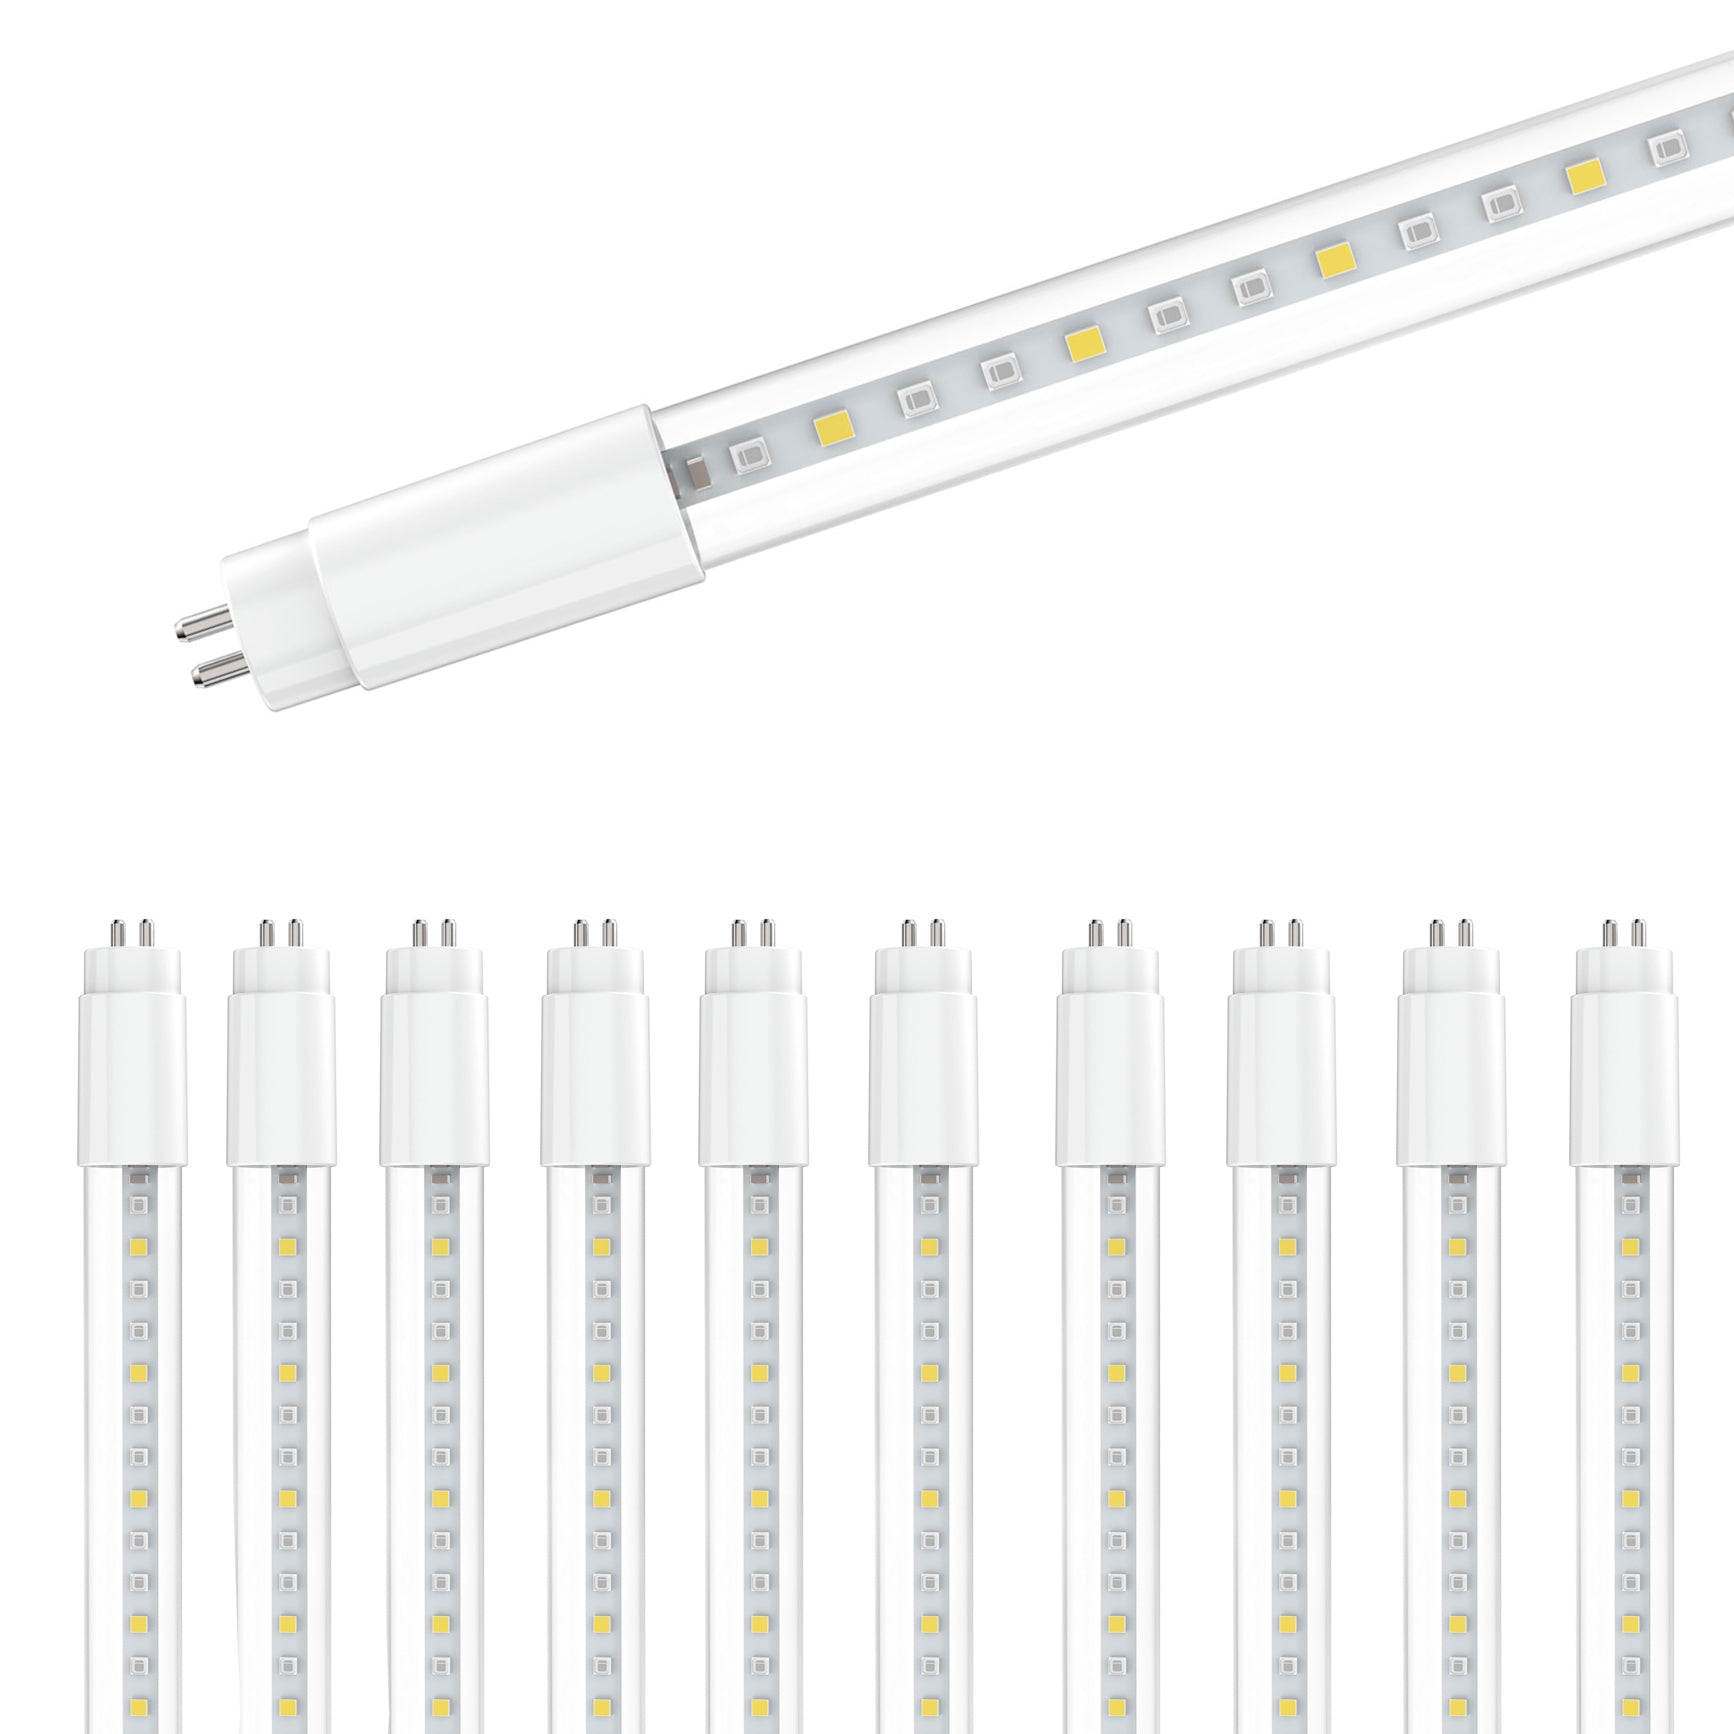 The LED chips on the Viribright Virigrow grow bulb tube, providing high efficiency and a longer lifespan than traditional fluorescent grow lights.